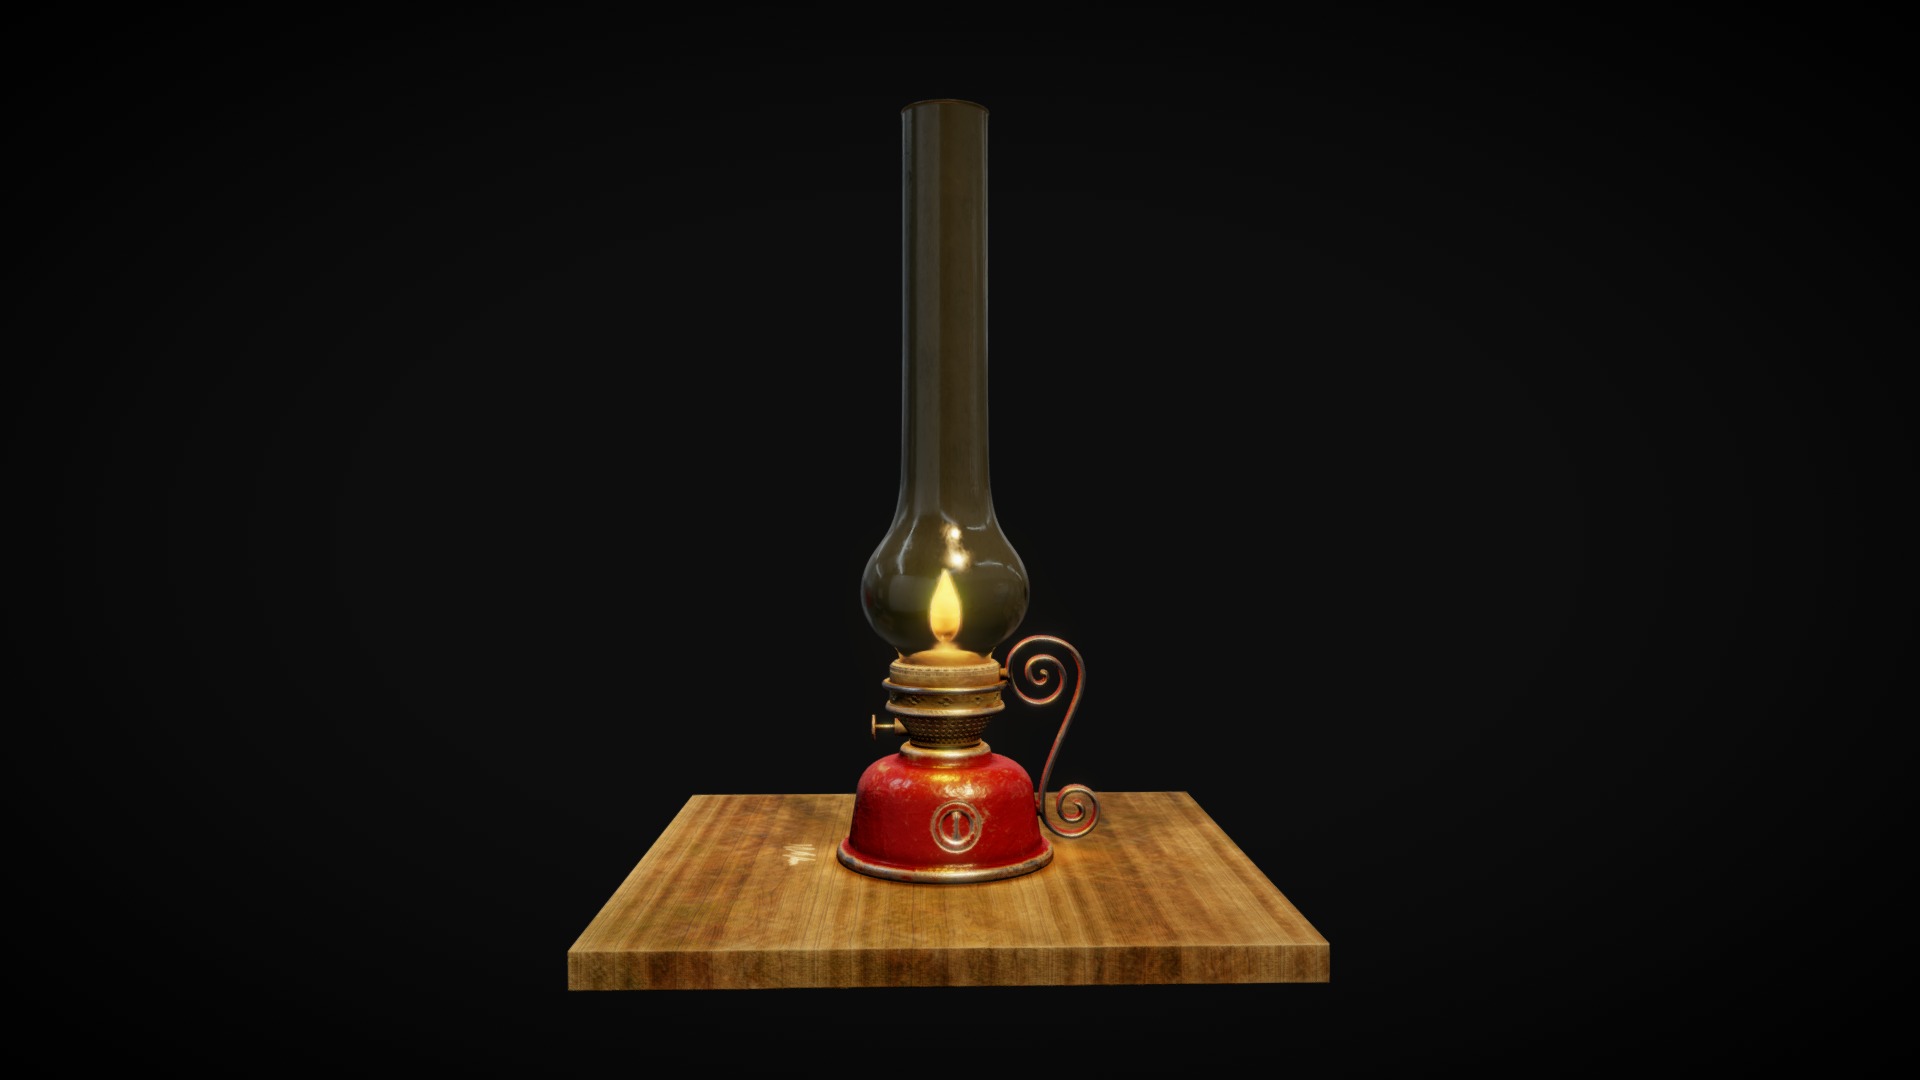 3D model Old Gaslamp - This is a 3D model of the Old Gaslamp. The 3D model is about a light bulb on a table.